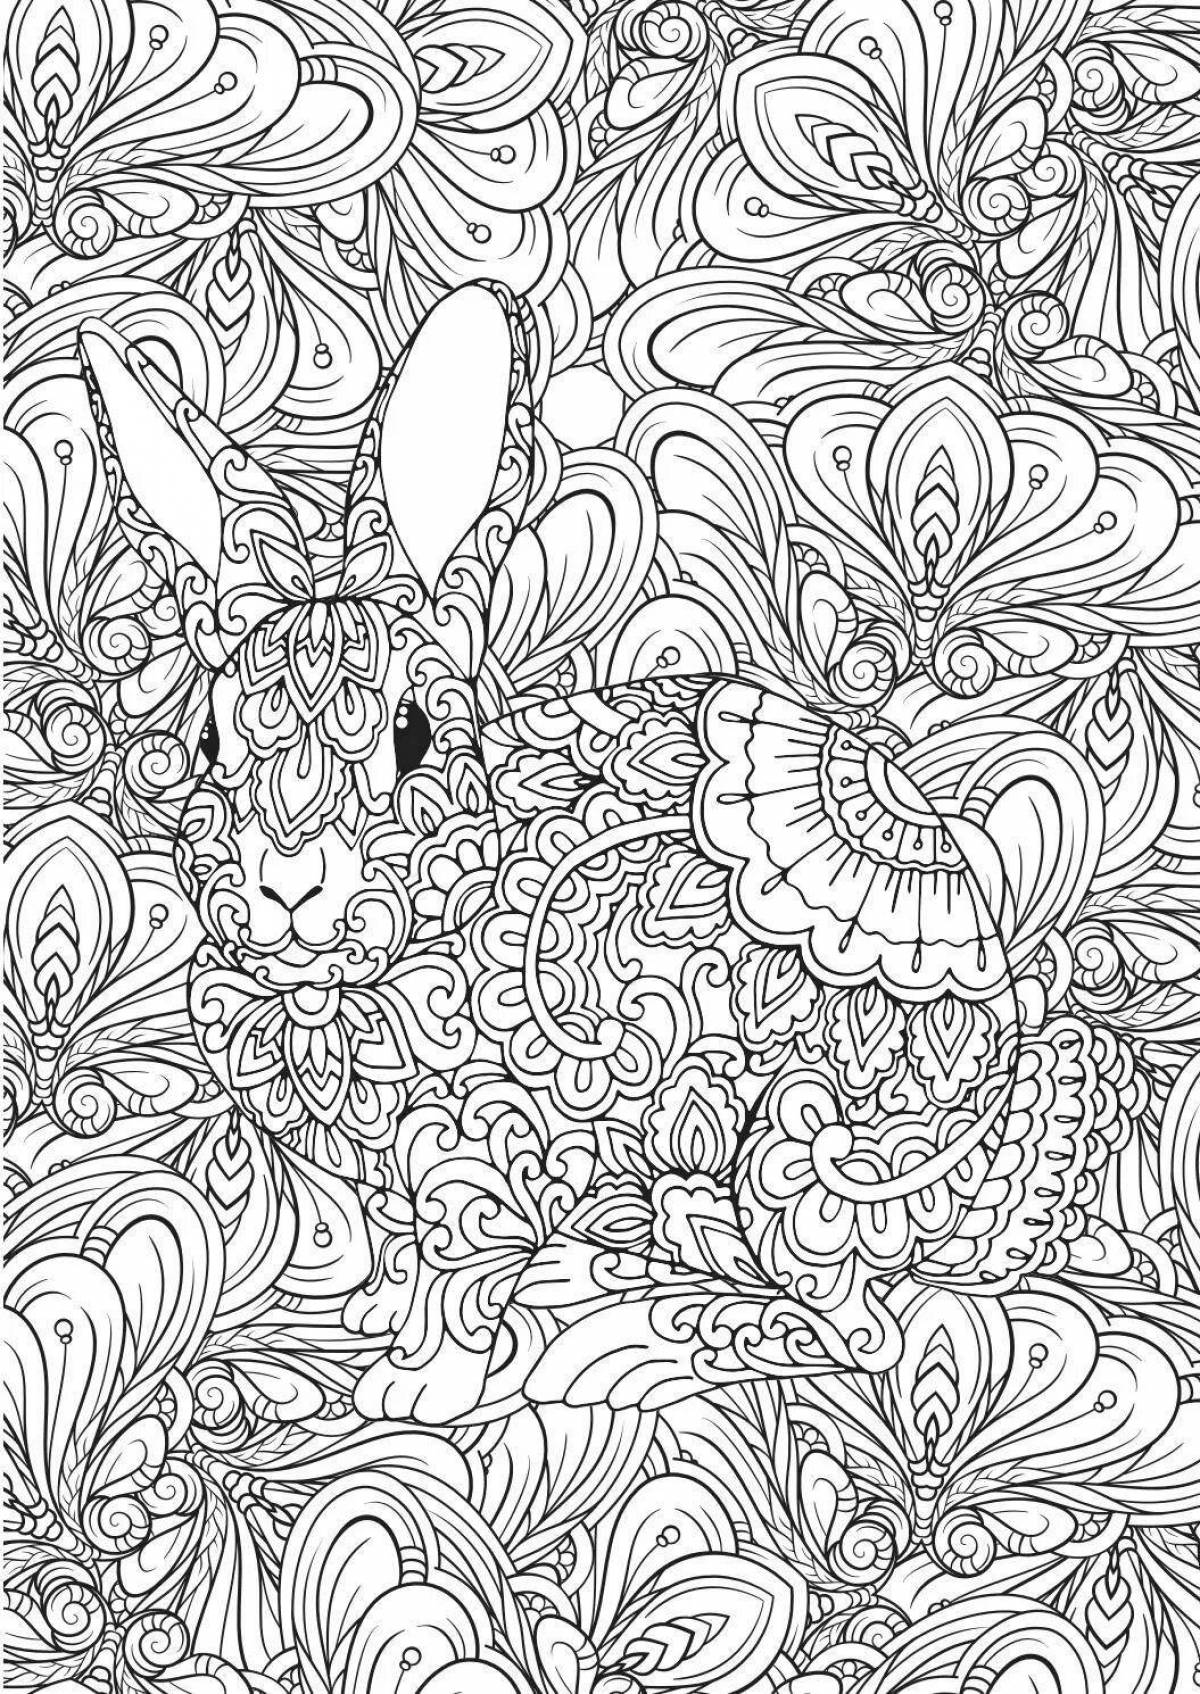 Calm coloring relax antistress for adults